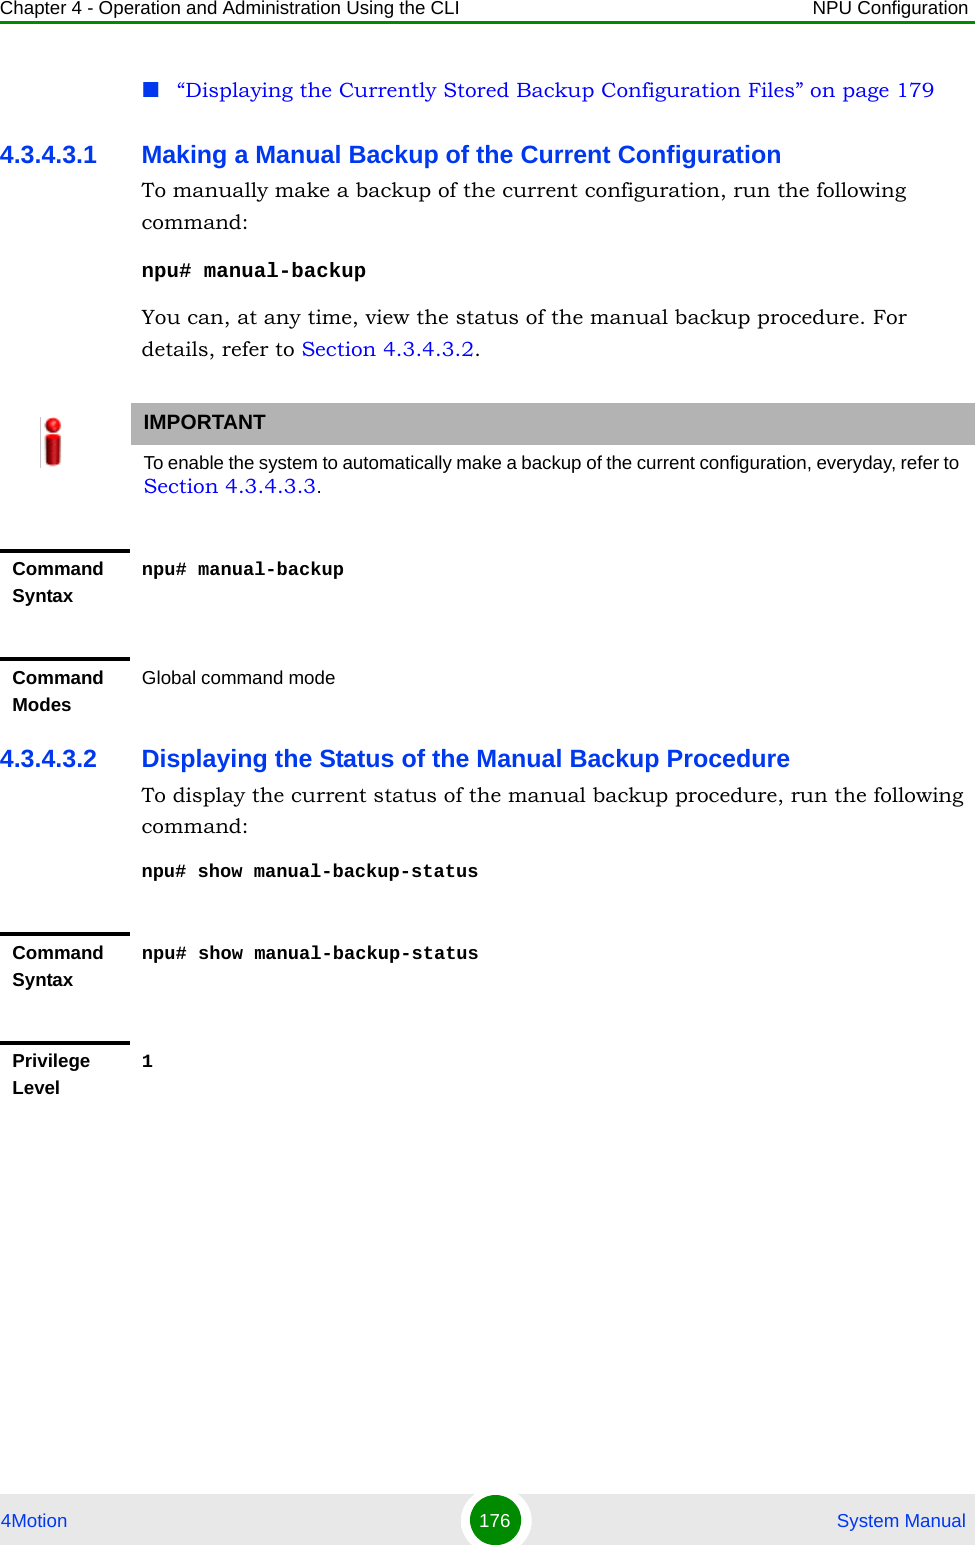 Chapter 4 - Operation and Administration Using the CLI NPU Configuration4Motion 176  System Manual“Displaying the Currently Stored Backup Configuration Files” on page 1794.3.4.3.1 Making a Manual Backup of the Current ConfigurationTo manually make a backup of the current configuration, run the following command:npu# manual-backupYou can, at any time, view the status of the manual backup procedure. For details, refer to Section 4.3.4.3.2.4.3.4.3.2 Displaying the Status of the Manual Backup ProcedureTo display the current status of the manual backup procedure, run the following command:npu# show manual-backup-statusIMPORTANTTo enable the system to automatically make a backup of the current configuration, everyday, refer to Section 4.3.4.3.3.Command Syntaxnpu# manual-backupCommand ModesGlobal command modeCommand Syntaxnpu# show manual-backup-statusPrivilege Level1